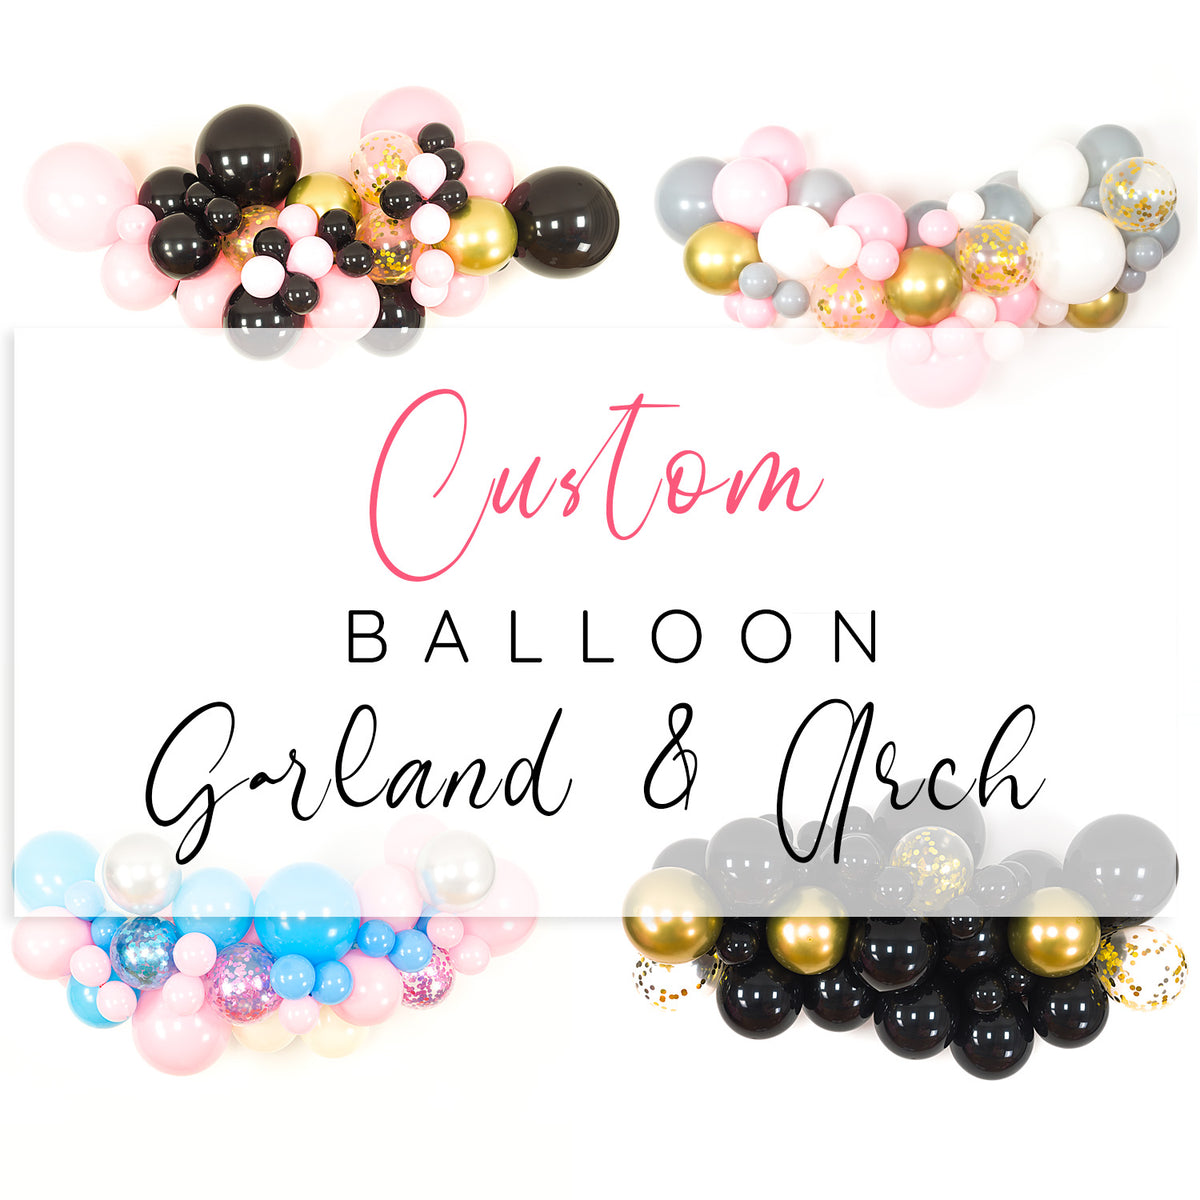 Custom DIY Balloon Garland and Arch Kit with 5, 11 and 18-inch